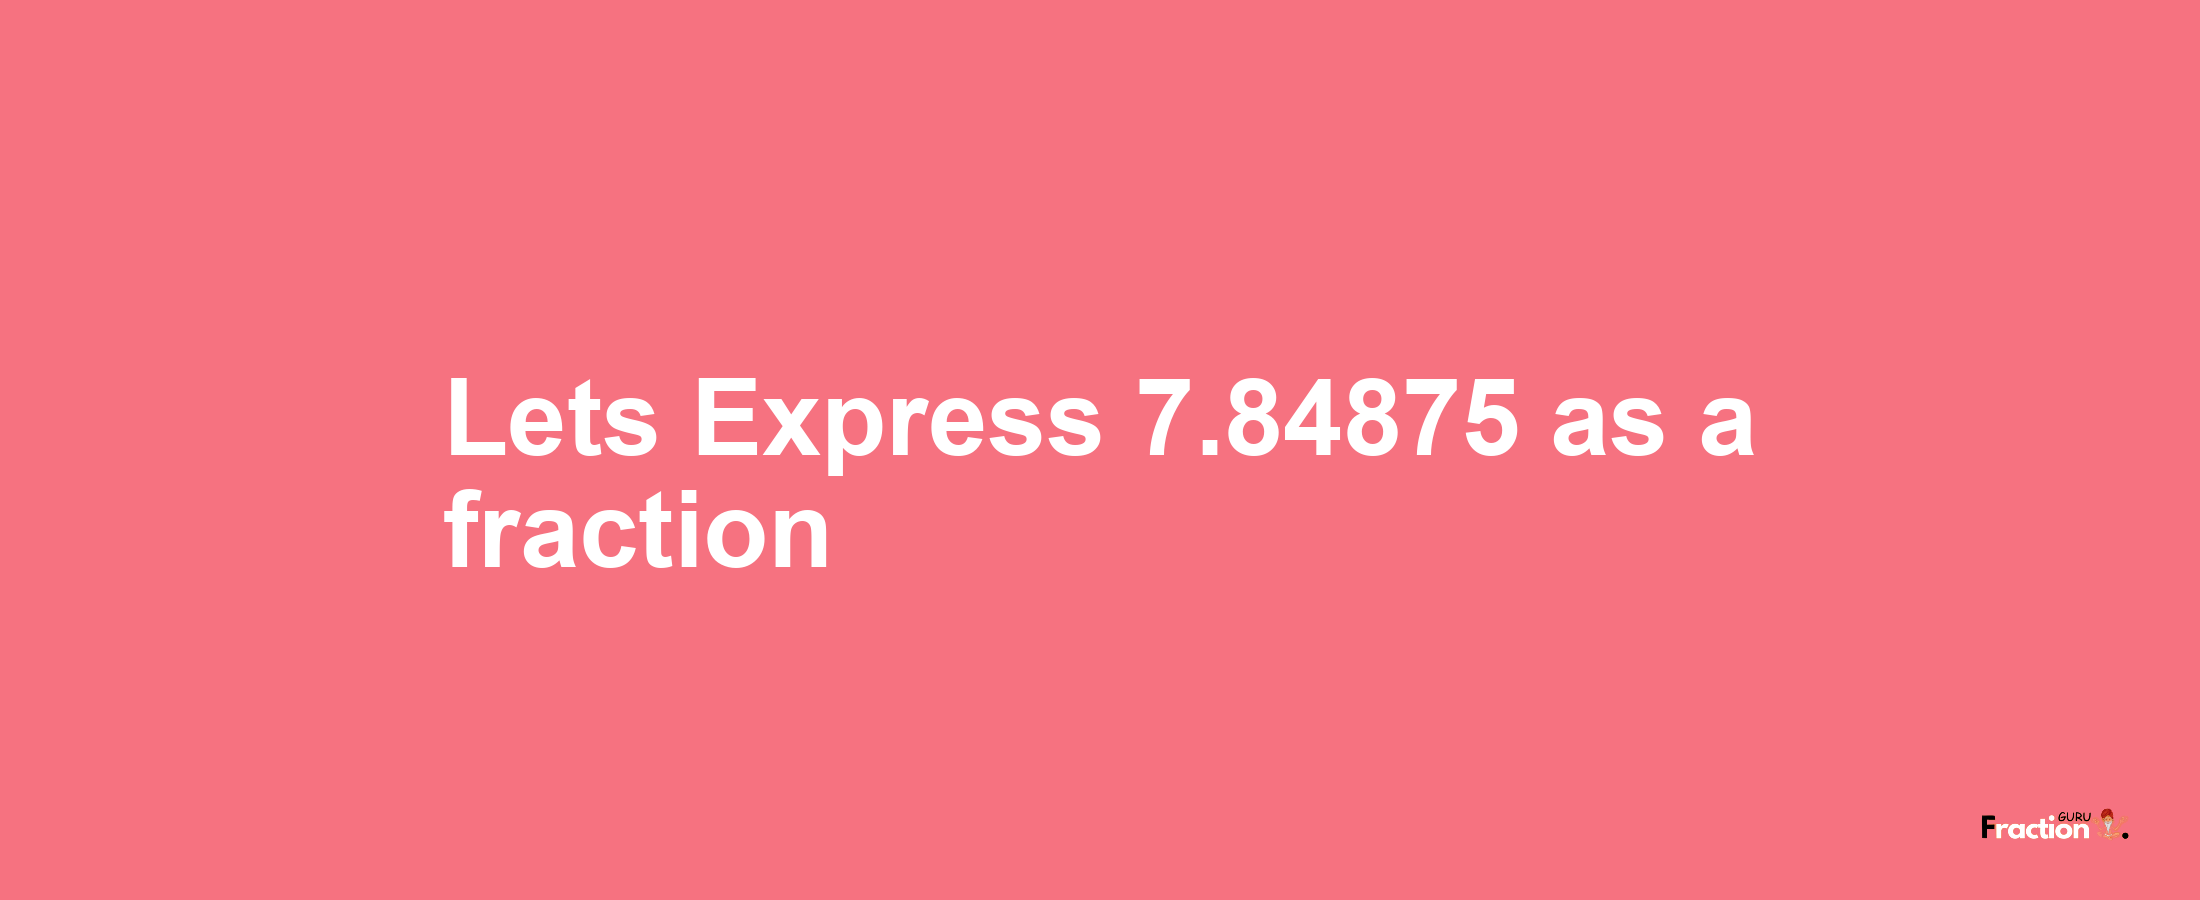 Lets Express 7.84875 as afraction